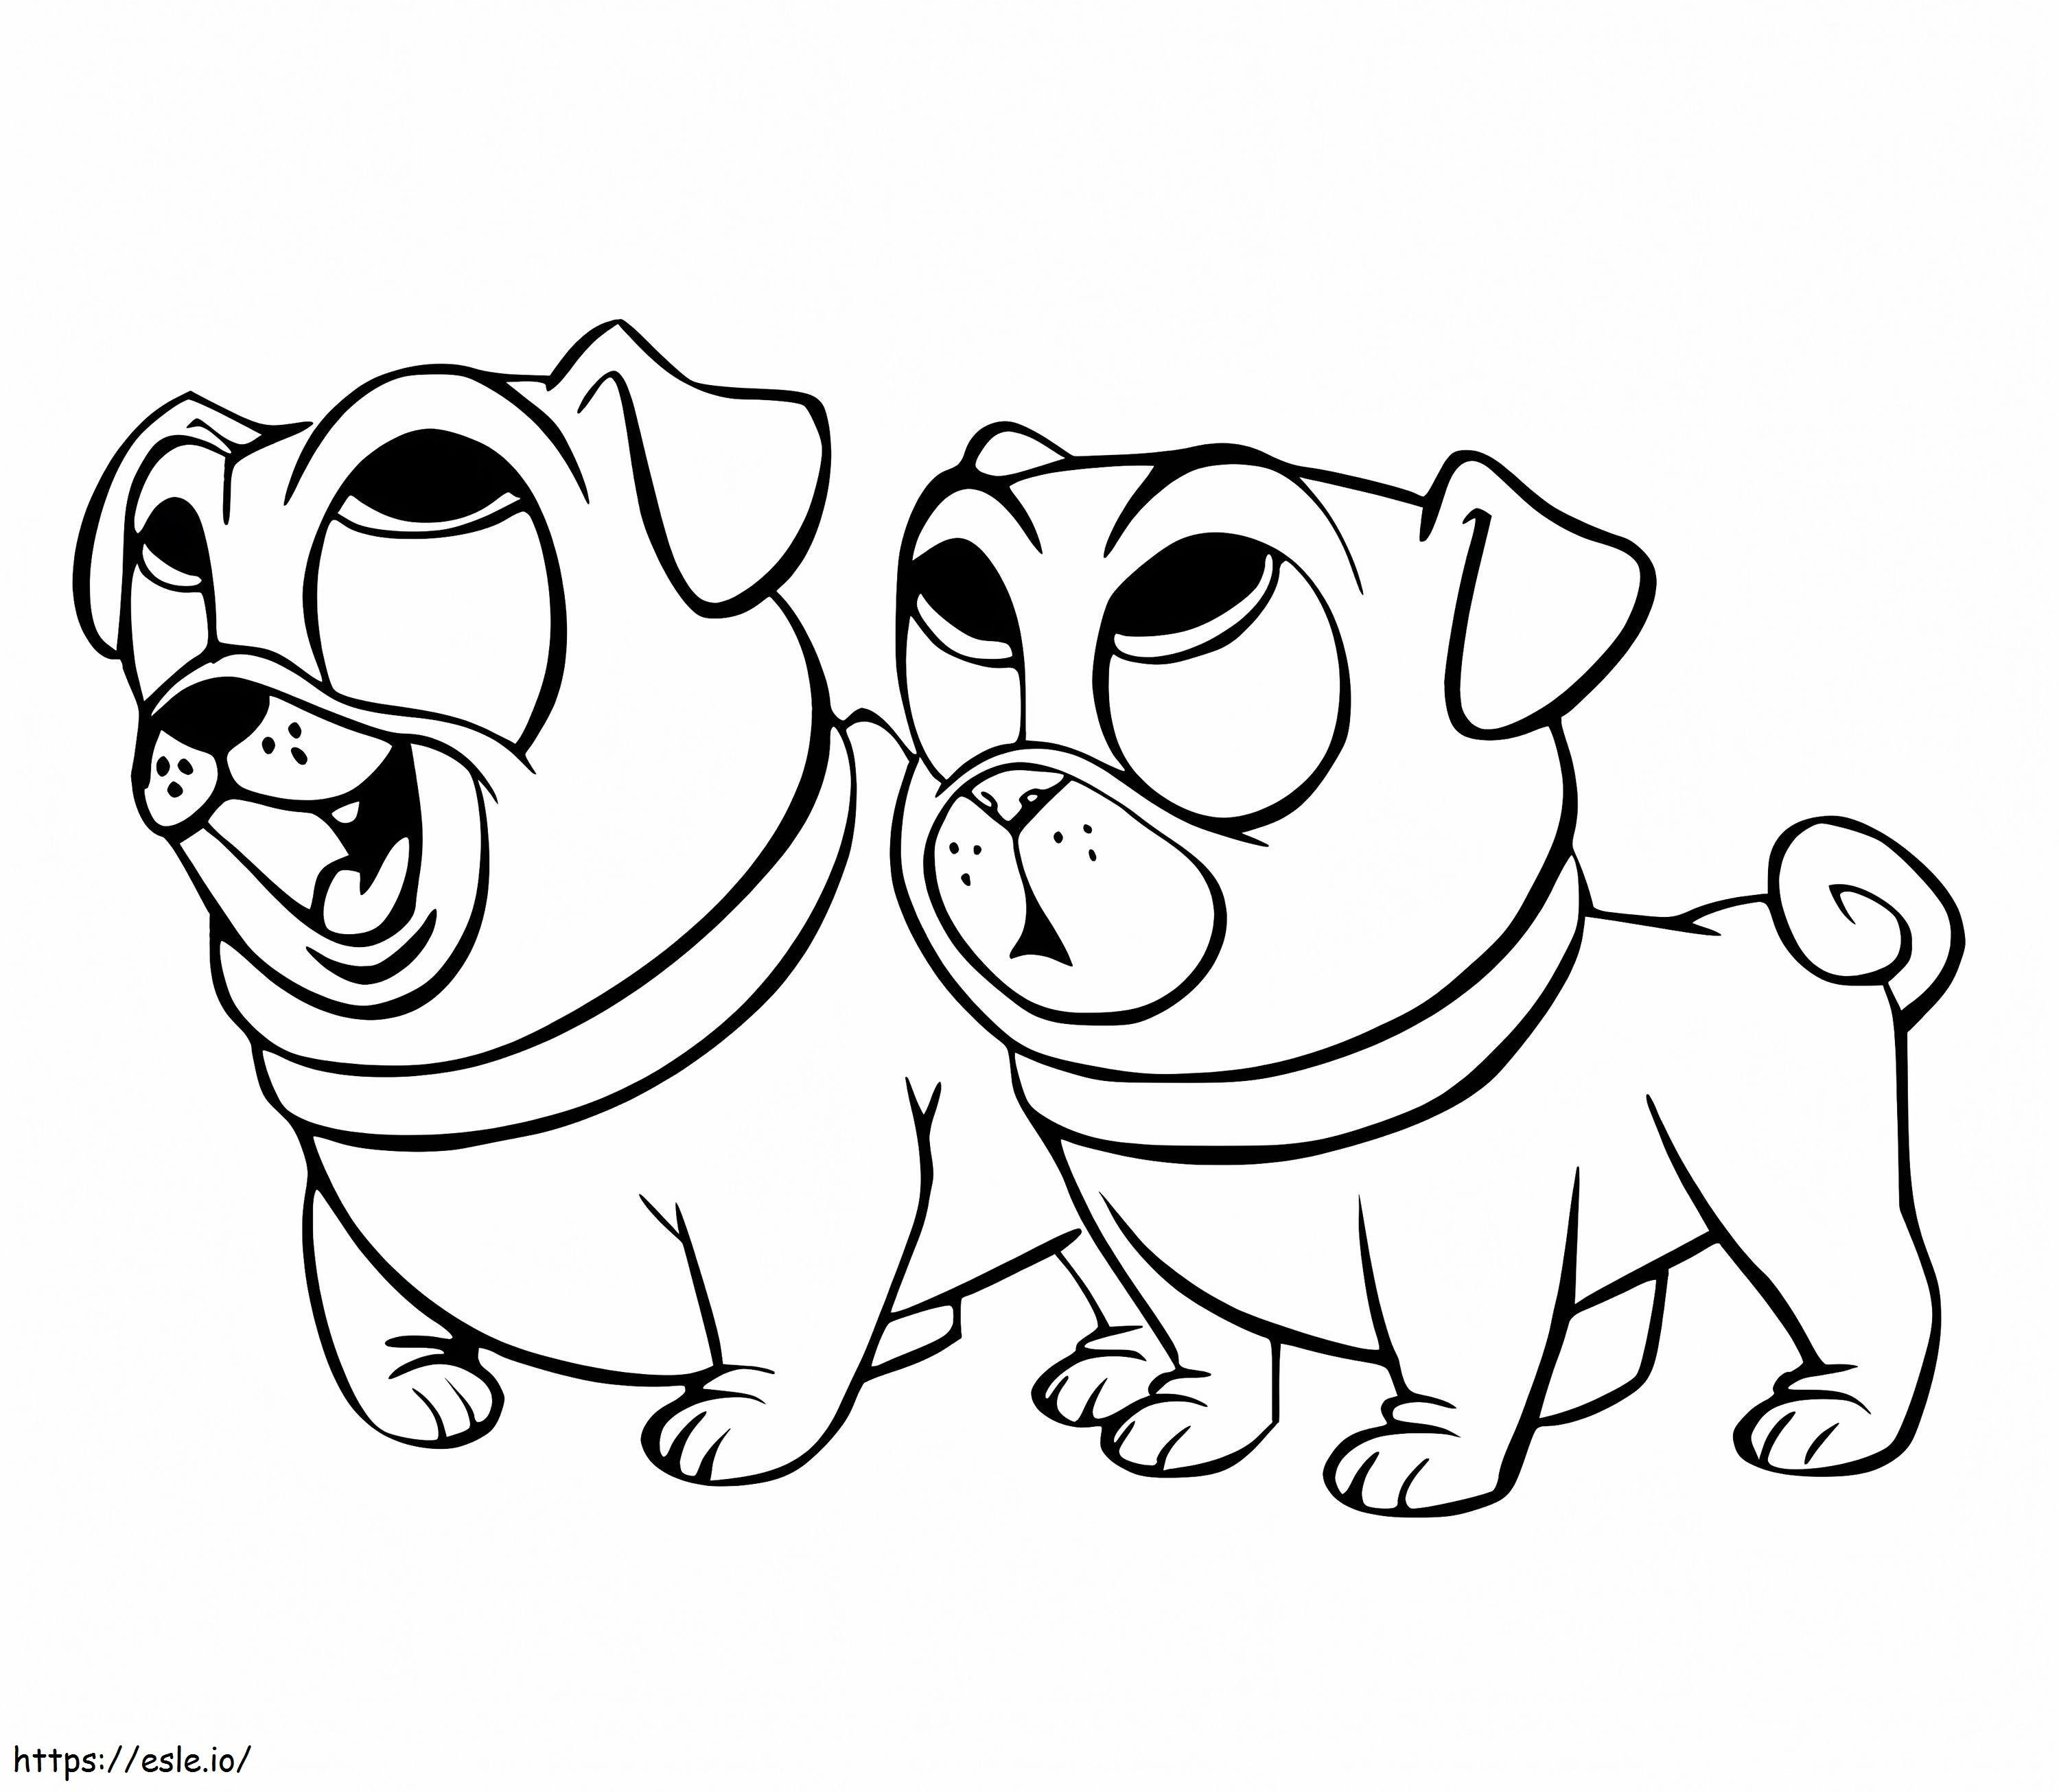 Bingo And Rolly Coloring Page 3 coloring page